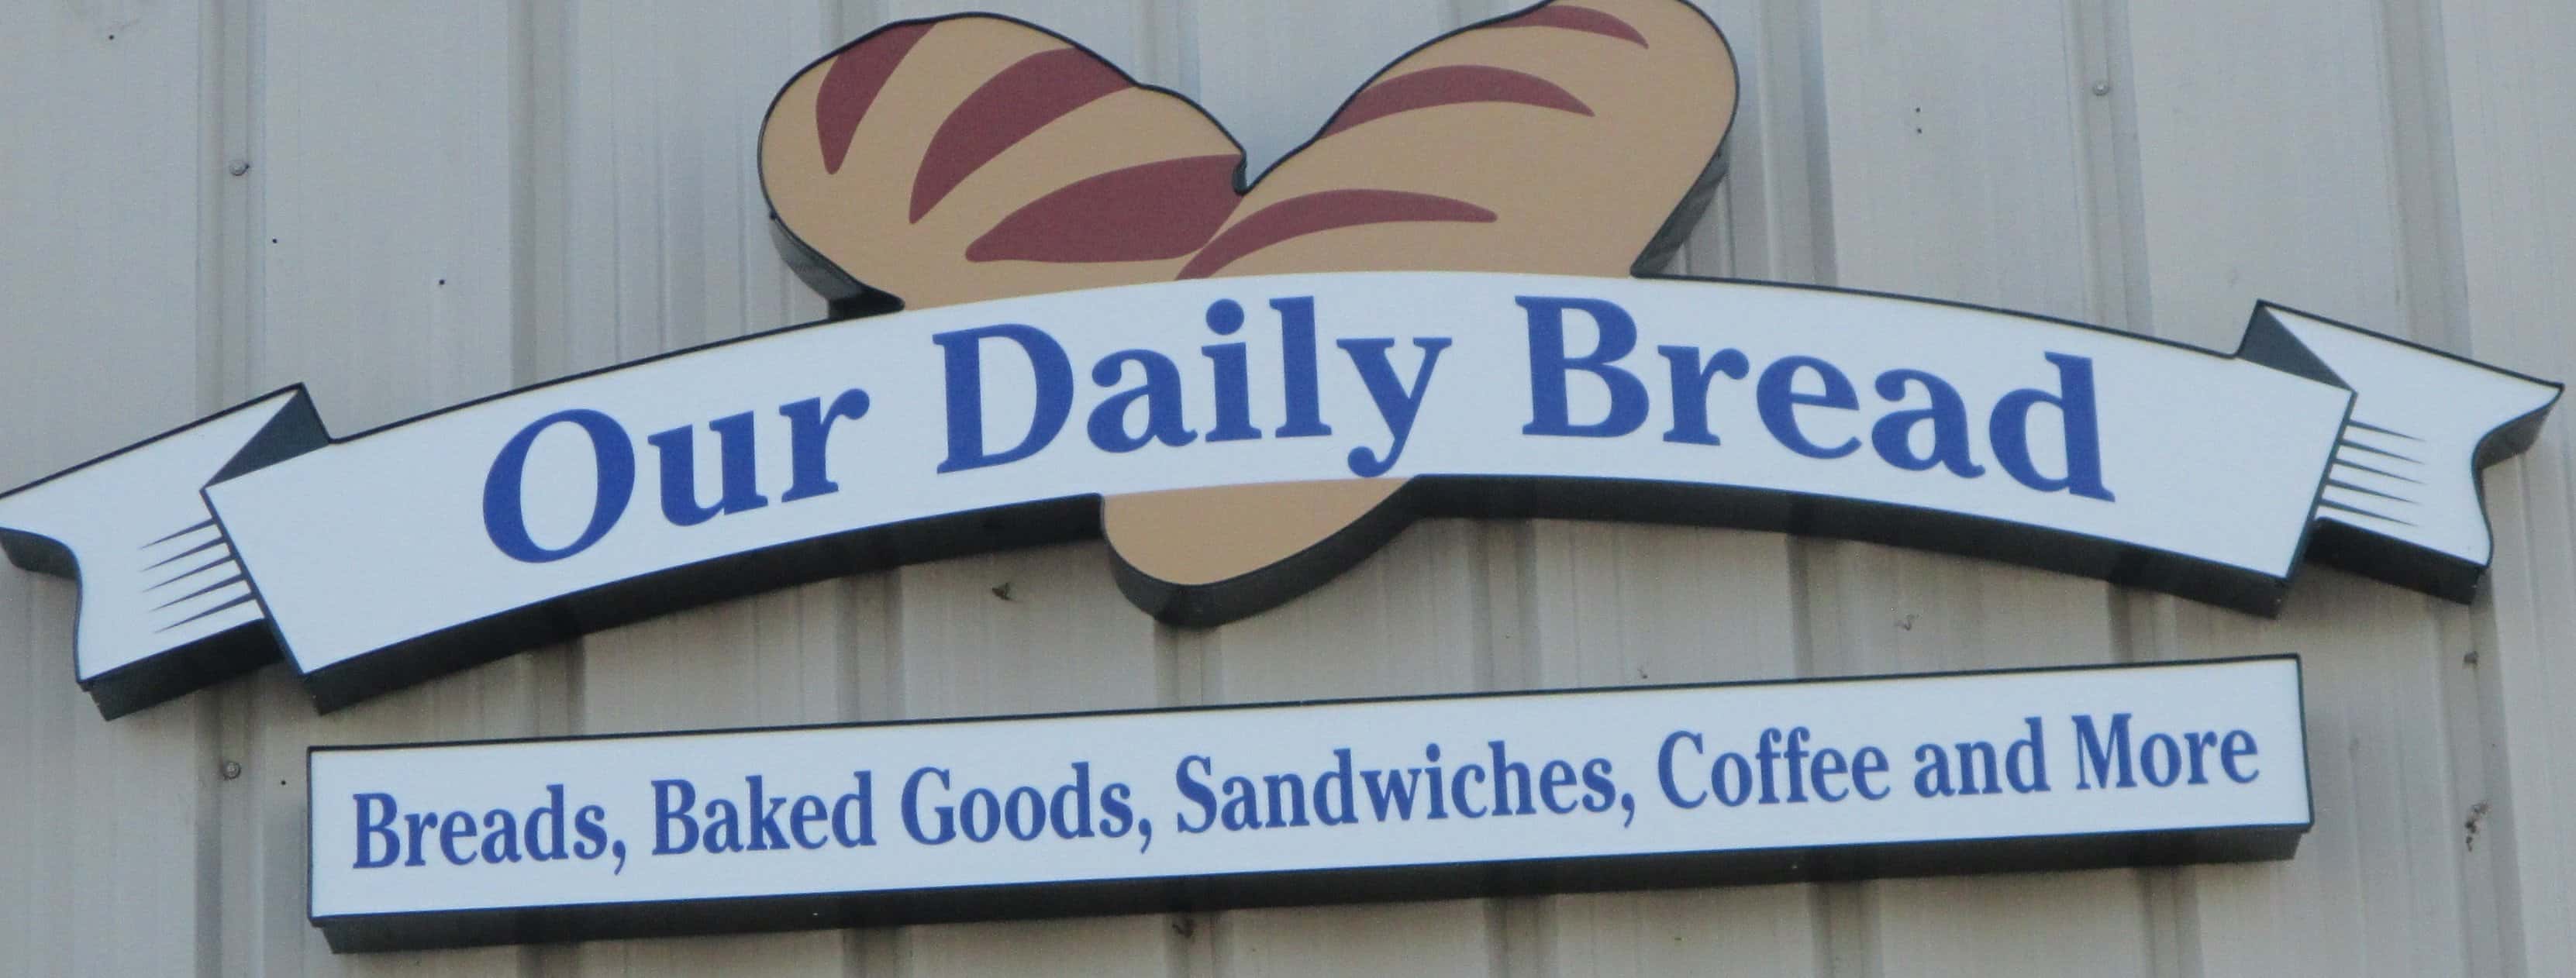 Our Daily Bread Encourages Customers to Help Others WHVOFM